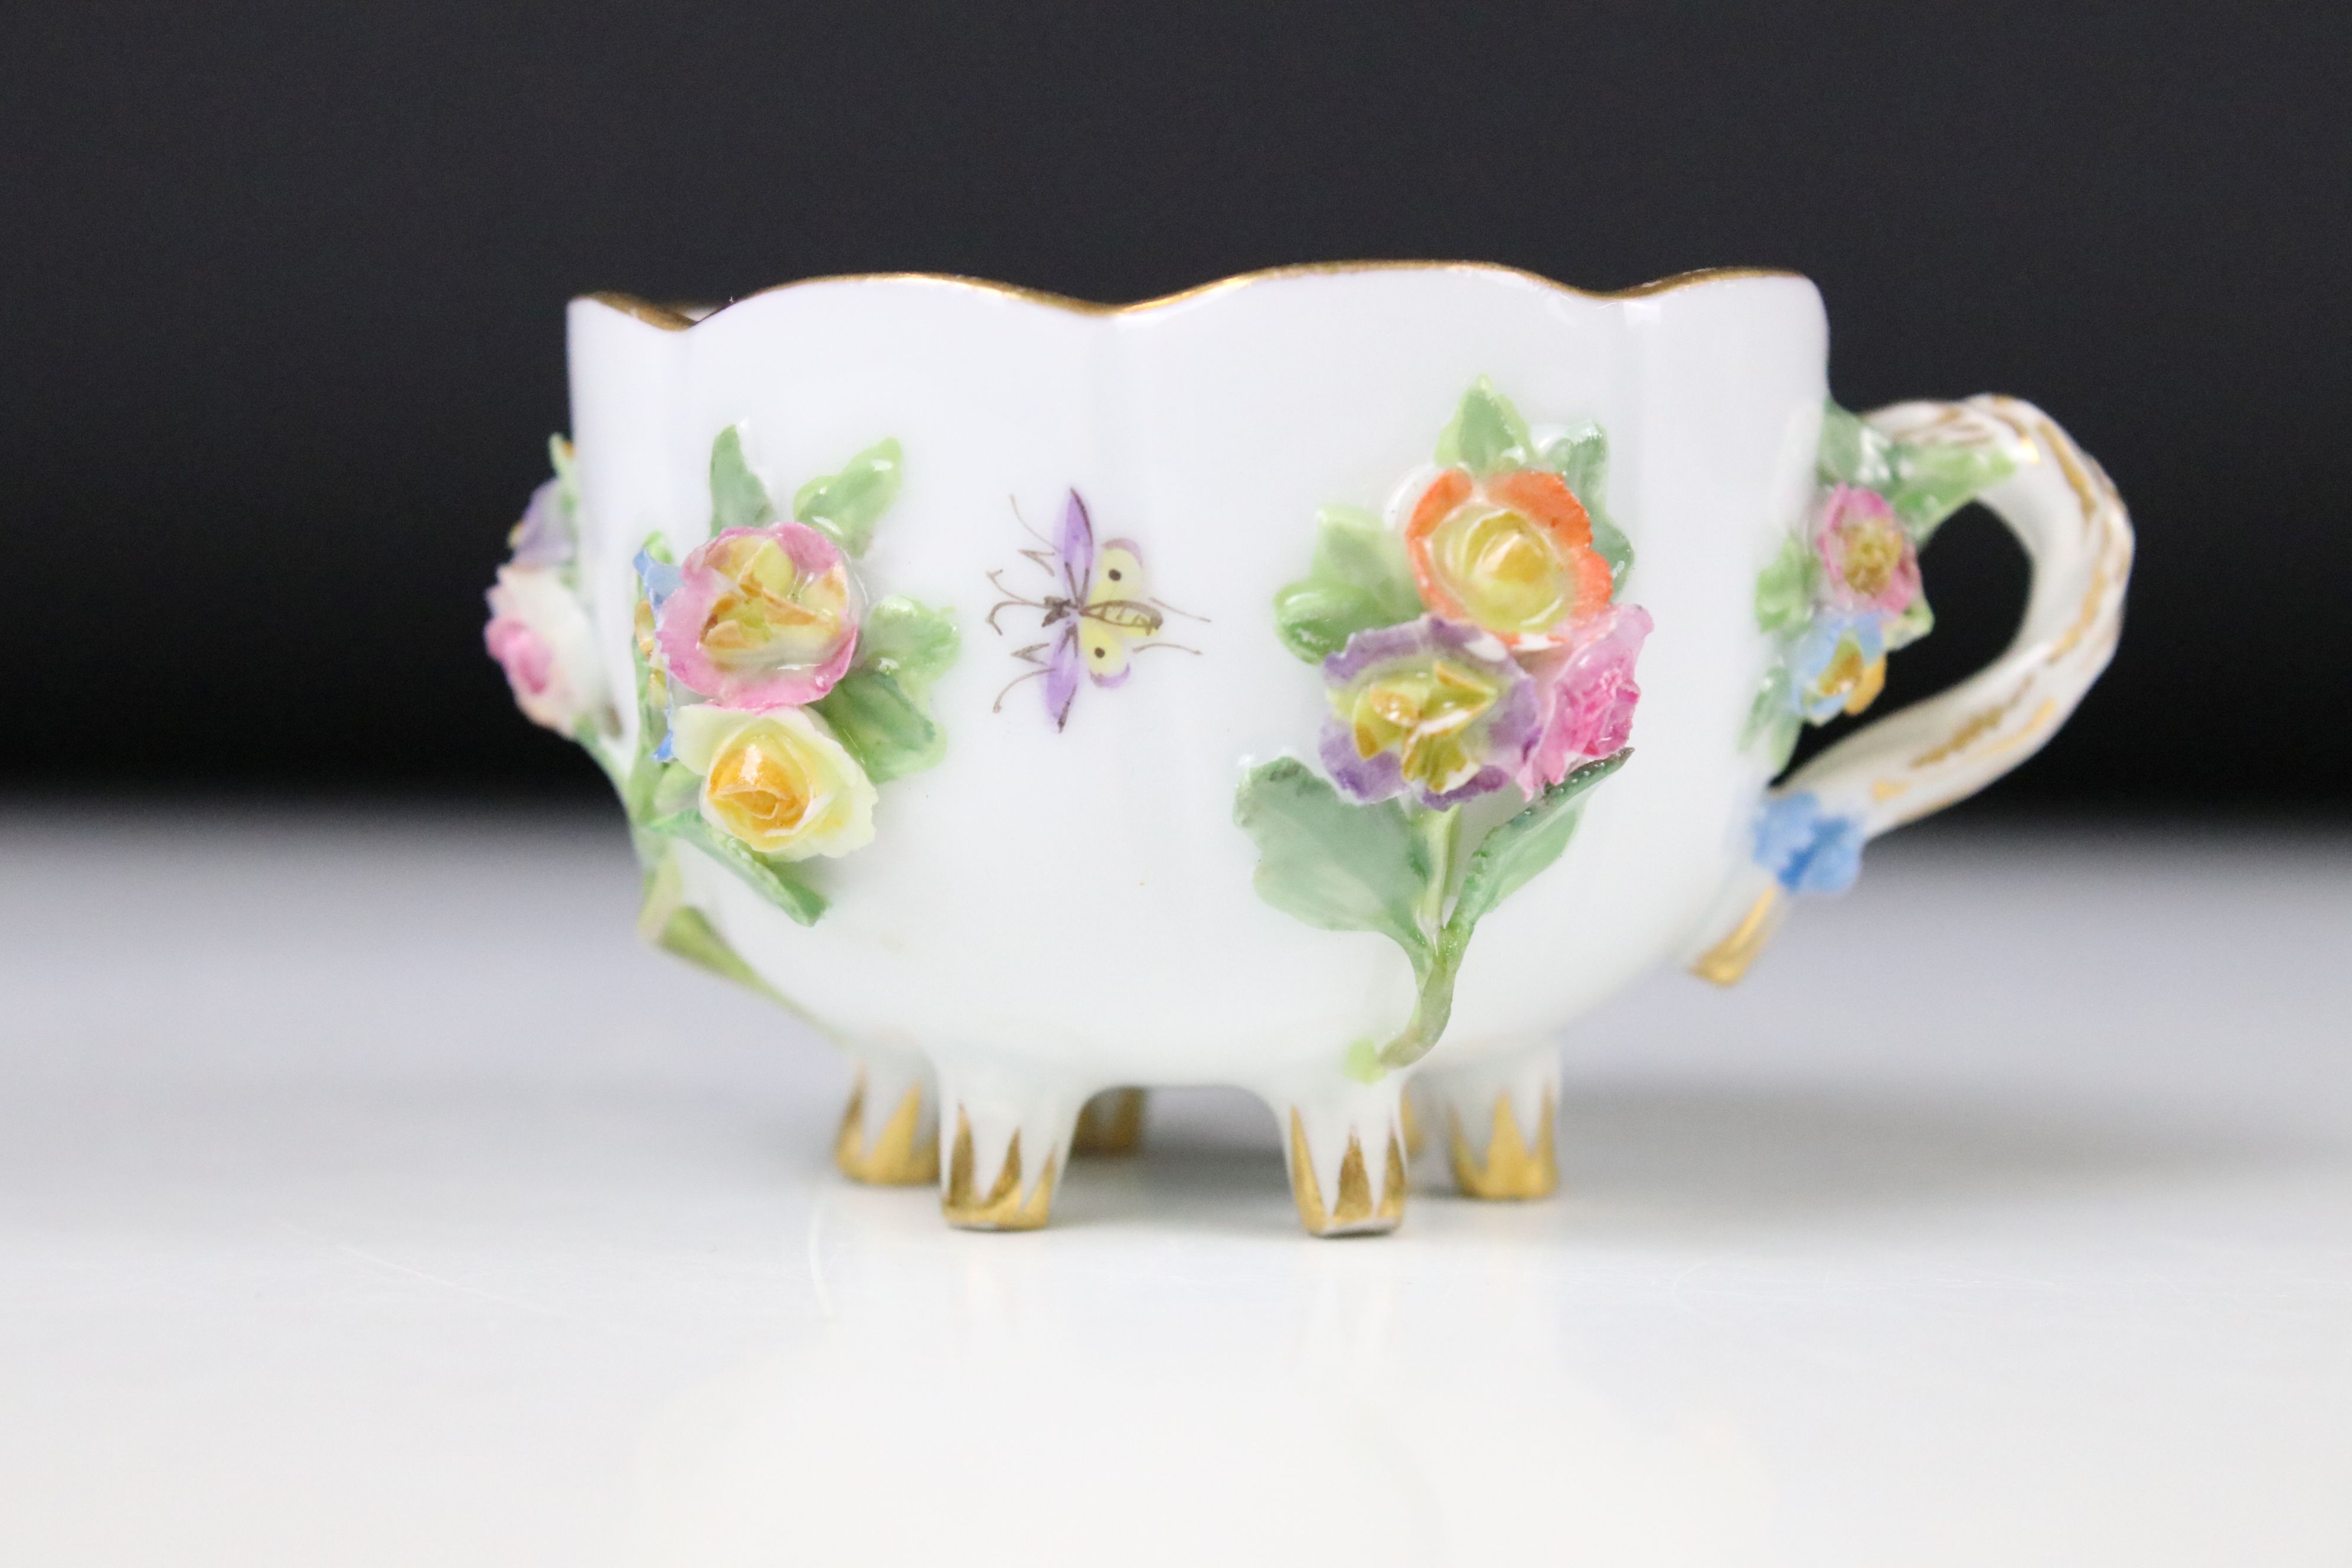 Meissen floral encrusted cup and saucer, decorated with insects and flowers - Image 5 of 8